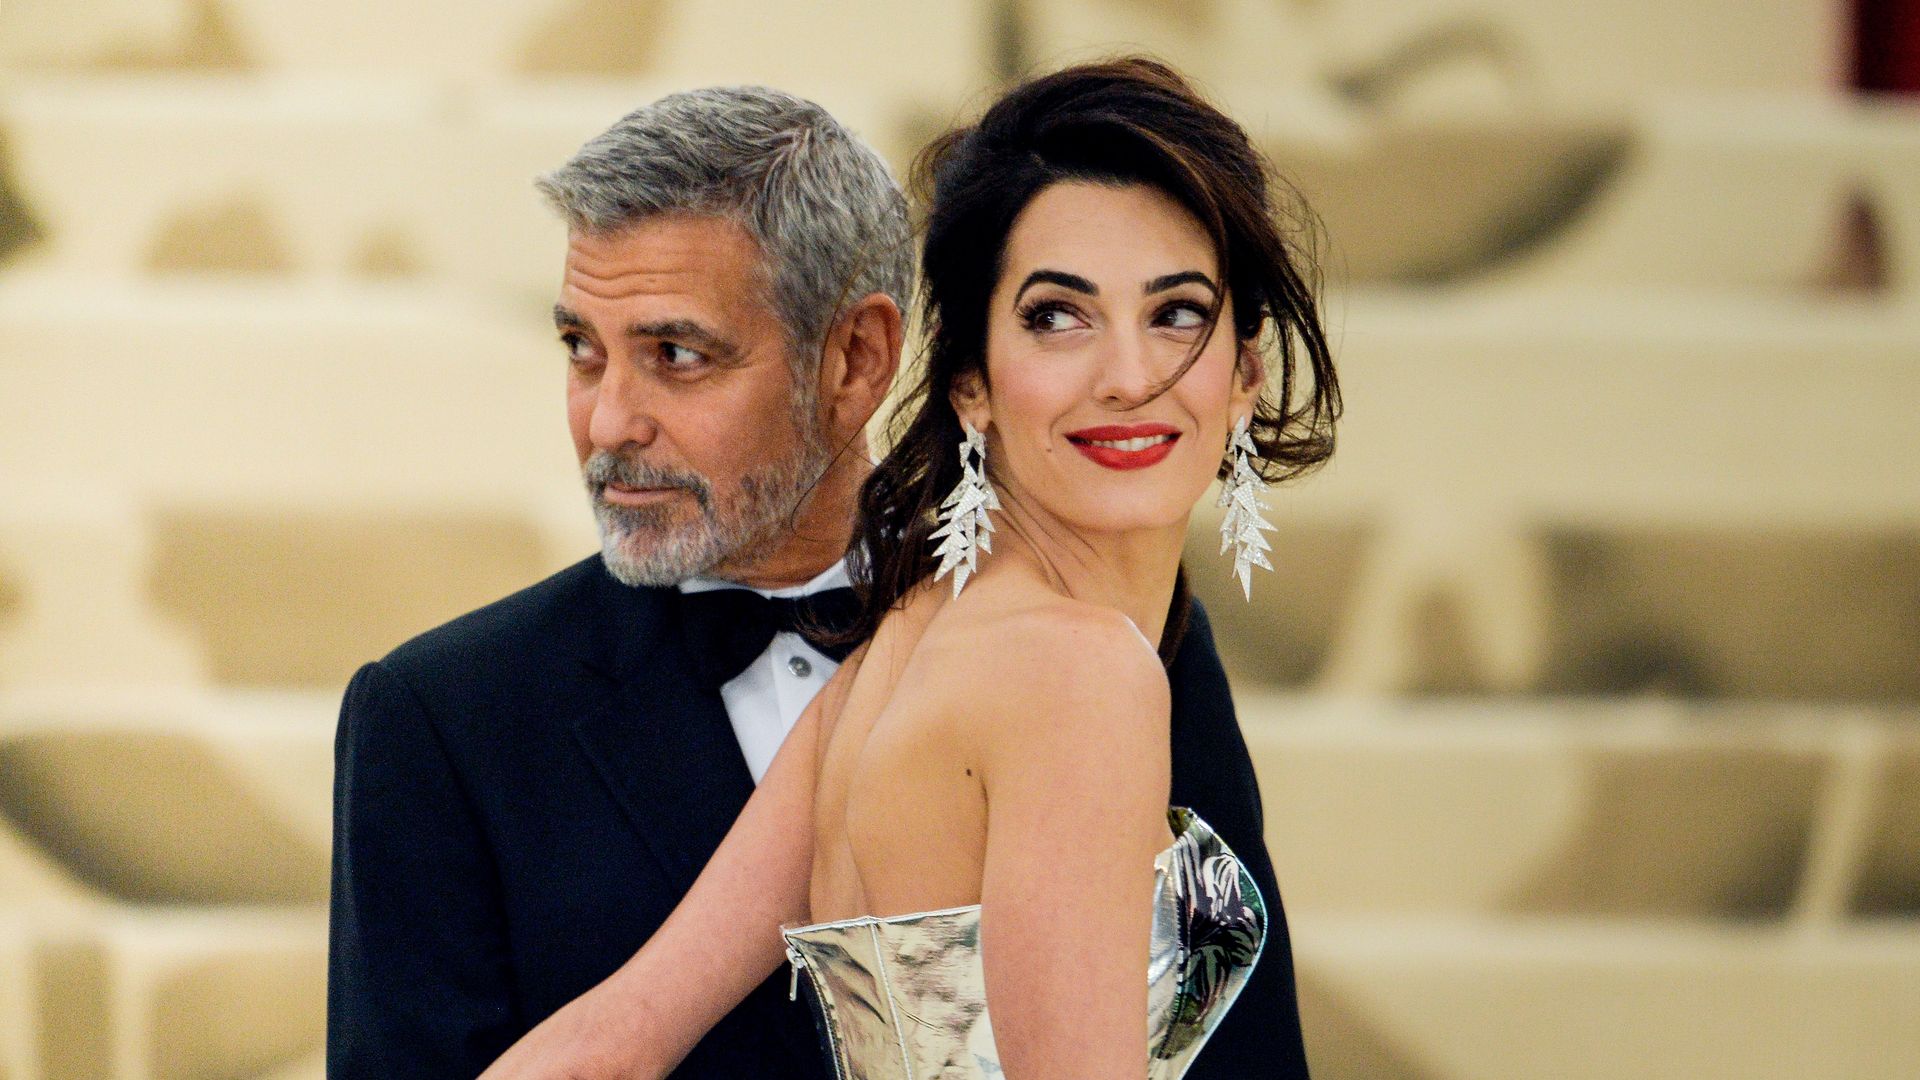 Actor George Clooney and lawyer Amal Clooney enter the Heavenly Bodies: Fashion & The Catholic Imagination Costume Institute Gala at The Metropolitan Museum on May 07, 2018 in New York City